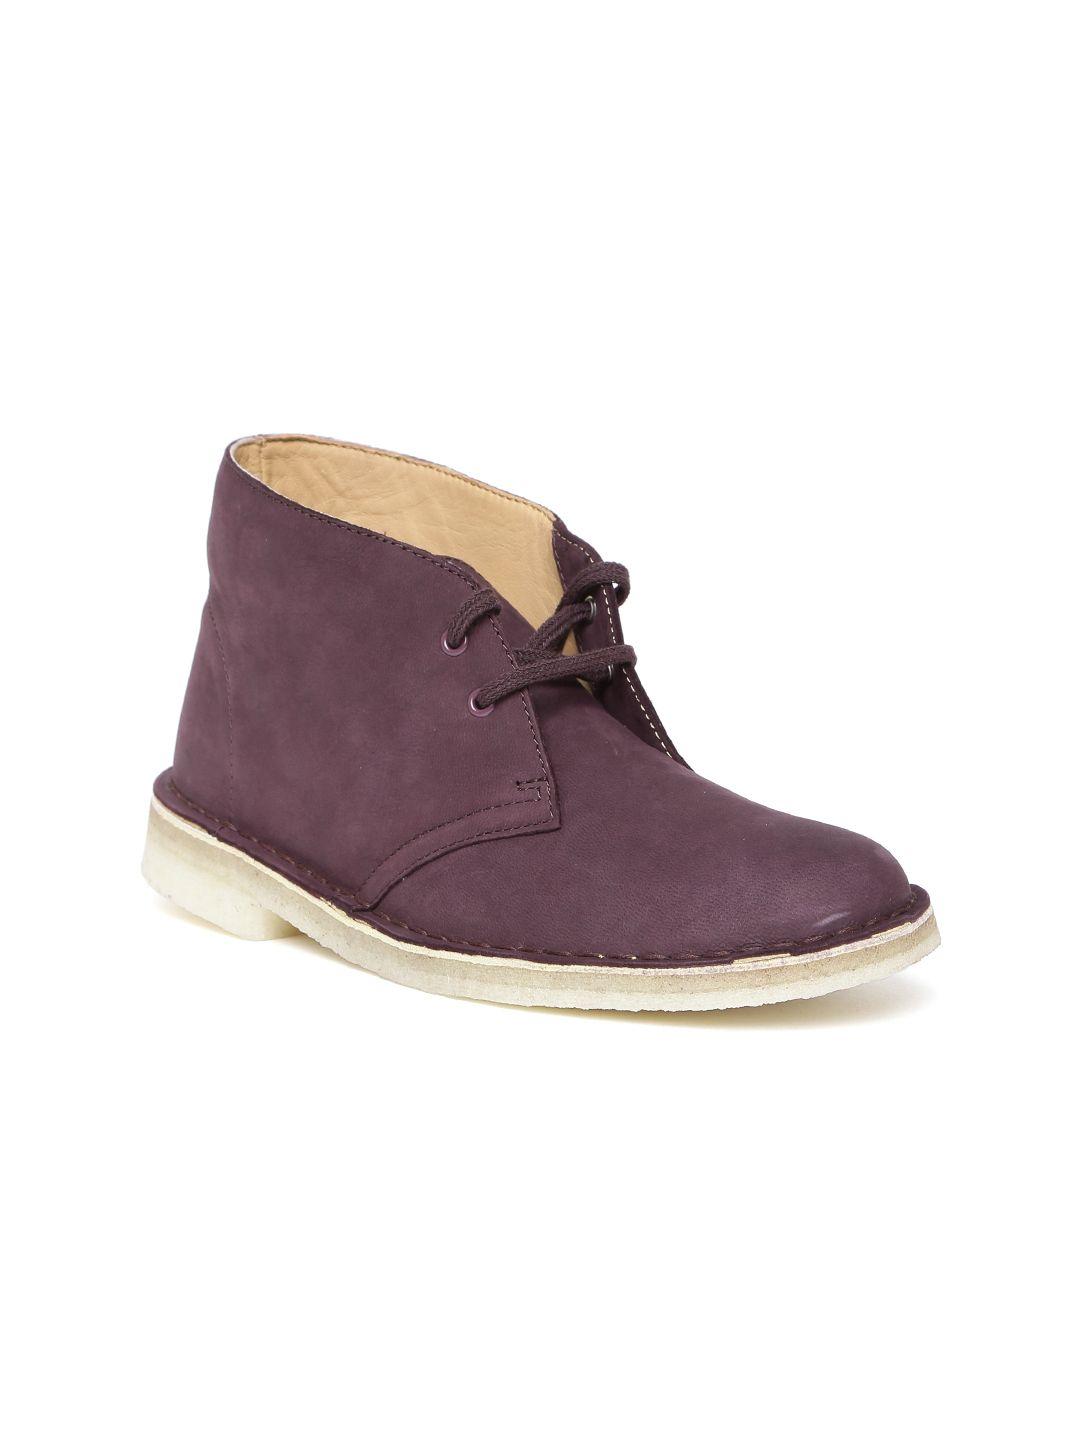 clarks women purple solid synthetic leather mid-top flat boots